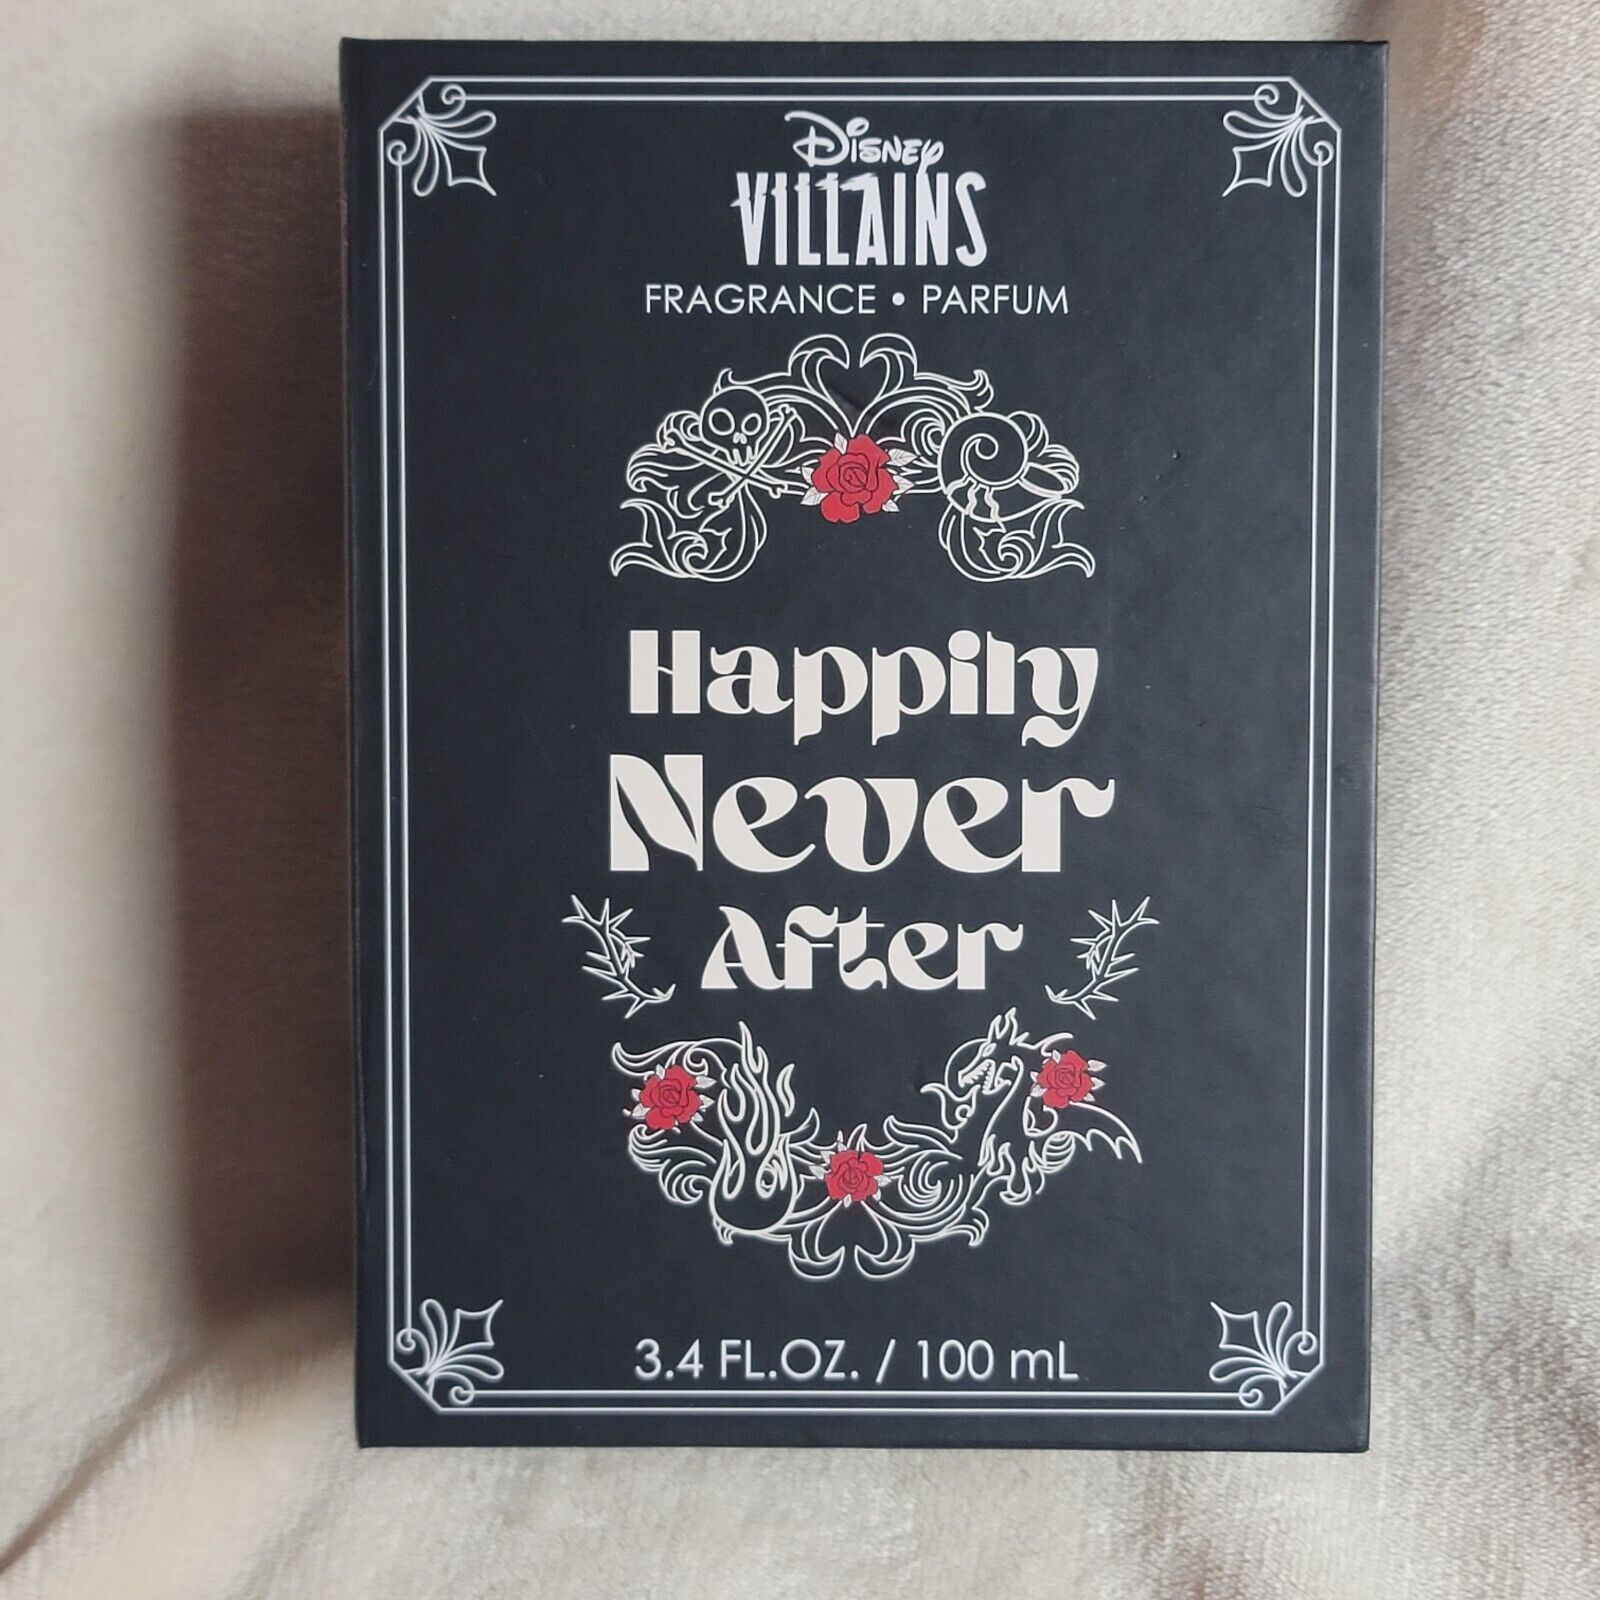 Torrid Disney Villains Happily Never After Perfume Full Size 3.4 oz New in Box - $49.49